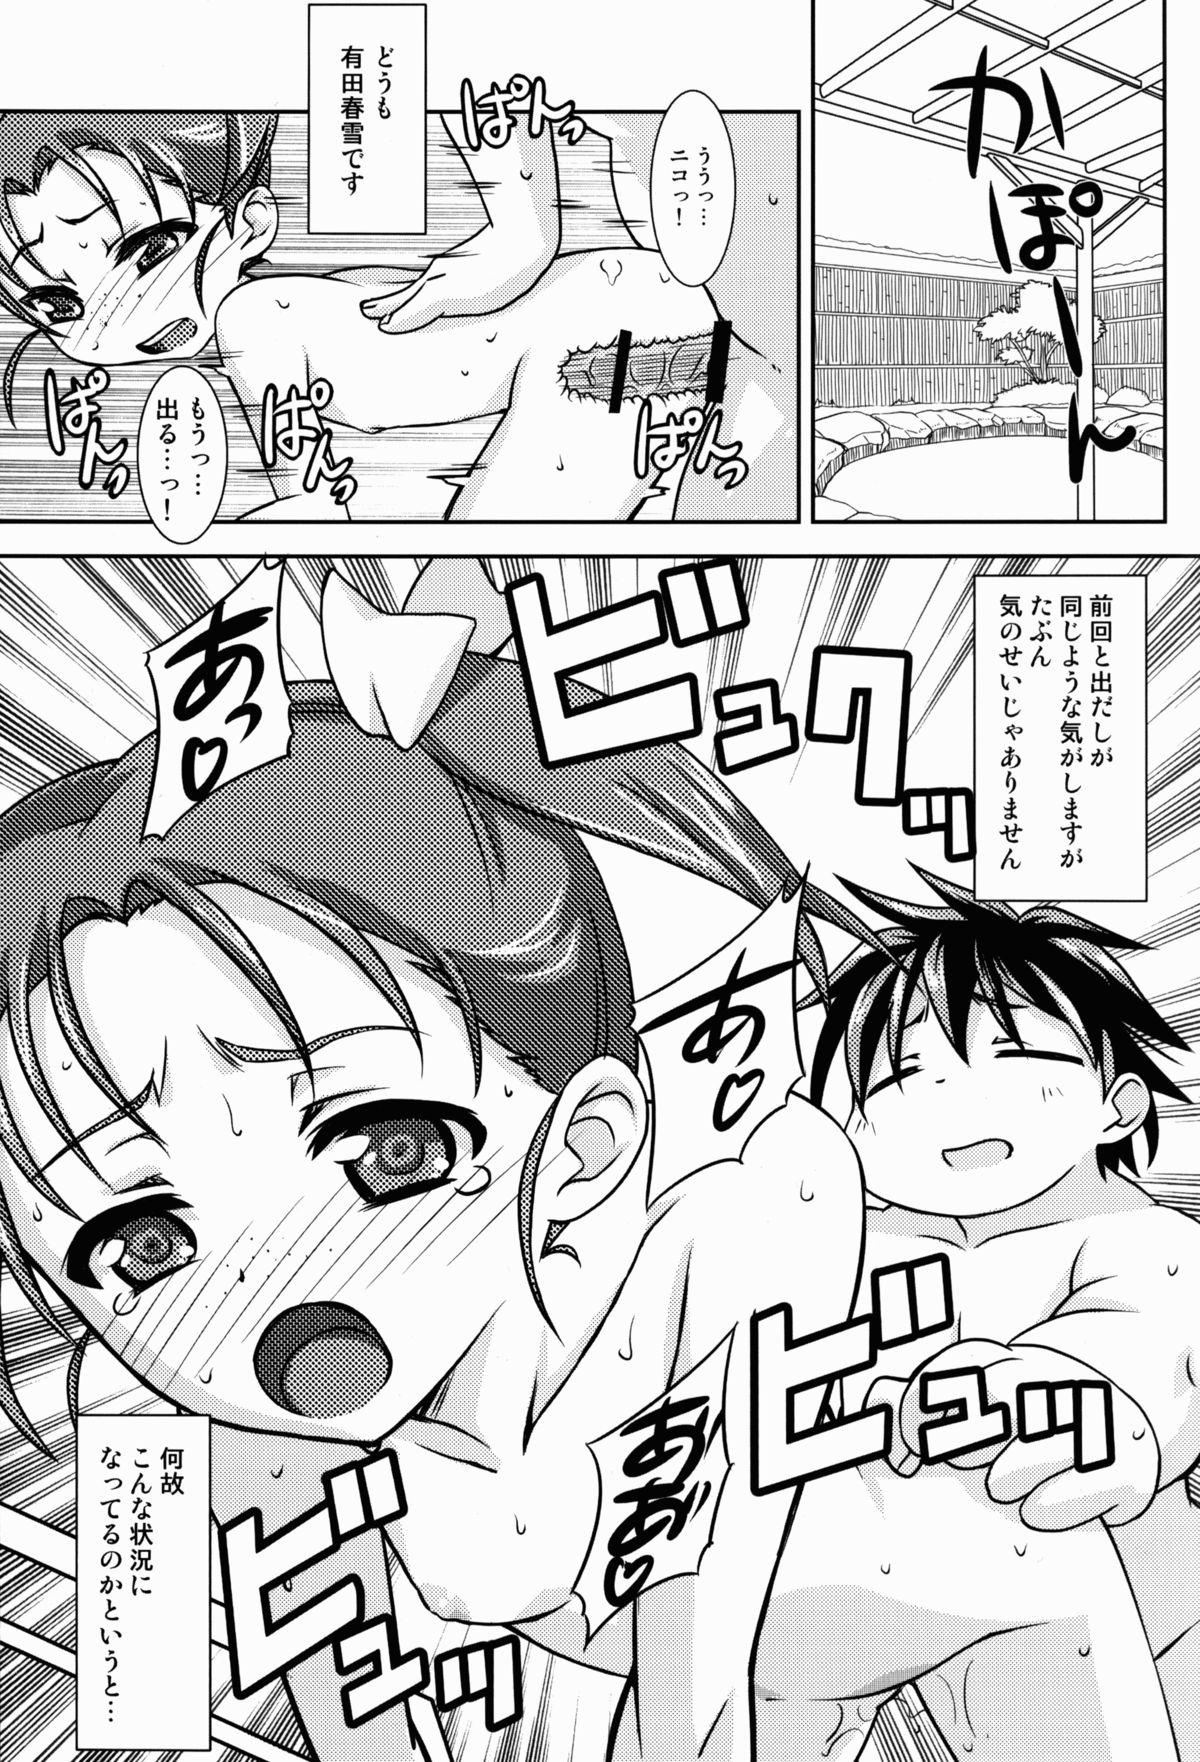 Anal Play Houkago Link 2 - Accel world Piroca - Page 3